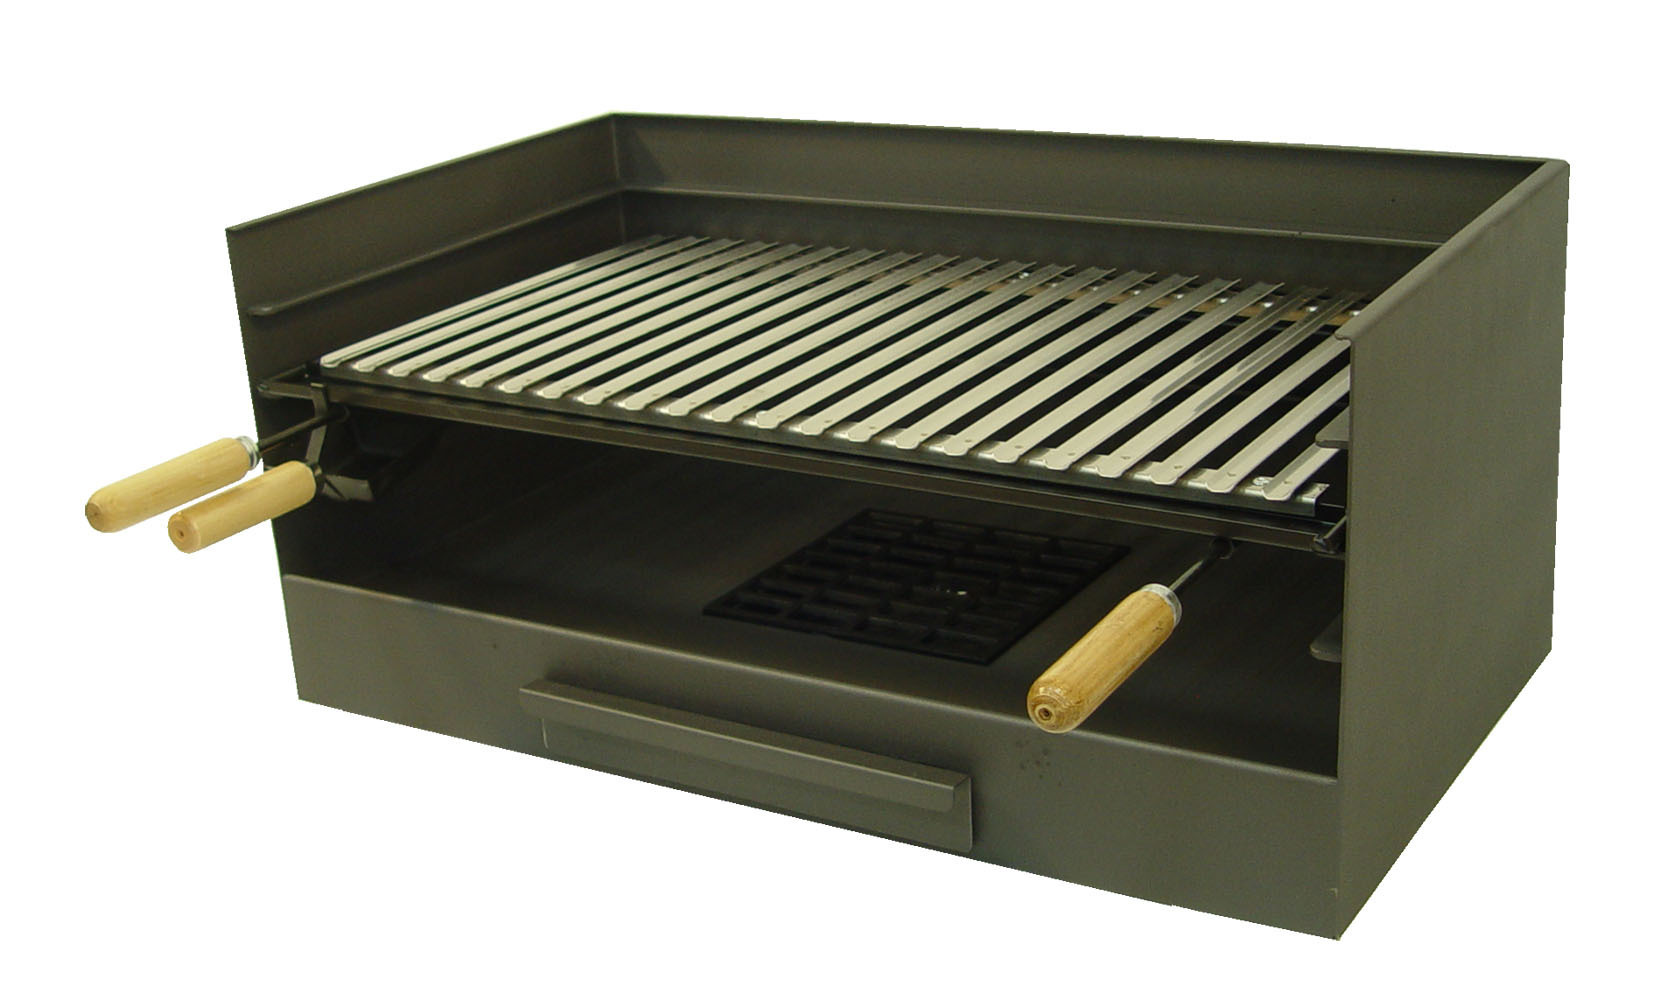 Imex El Zorro 10803 Fireplace Grill with Ash Pan 46 x 36 cm 